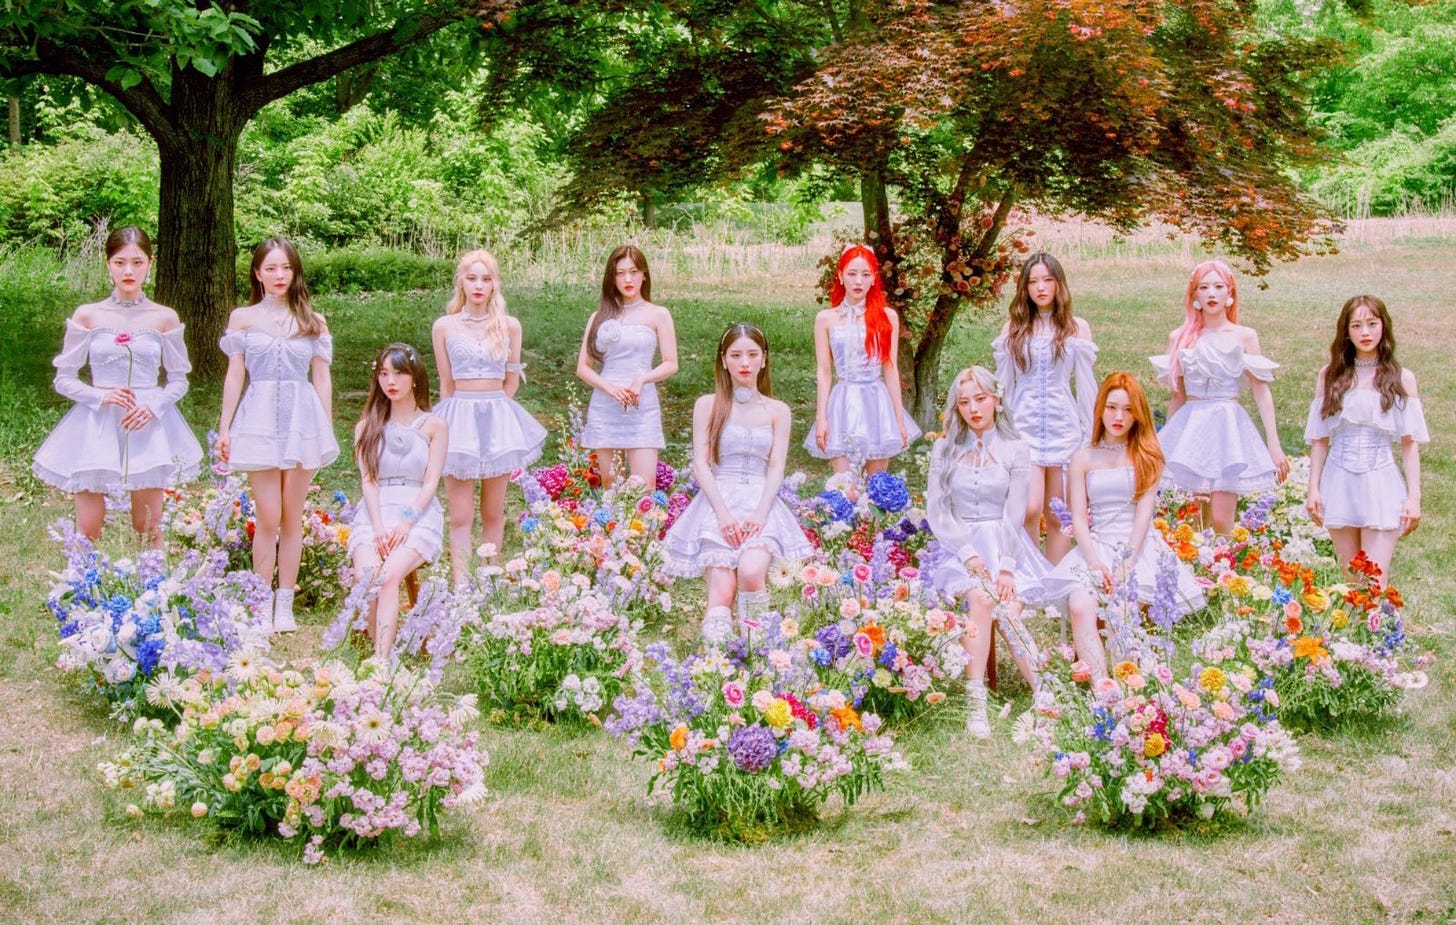 LOONA – 'Flip That' review: an understated but subtly addictive return